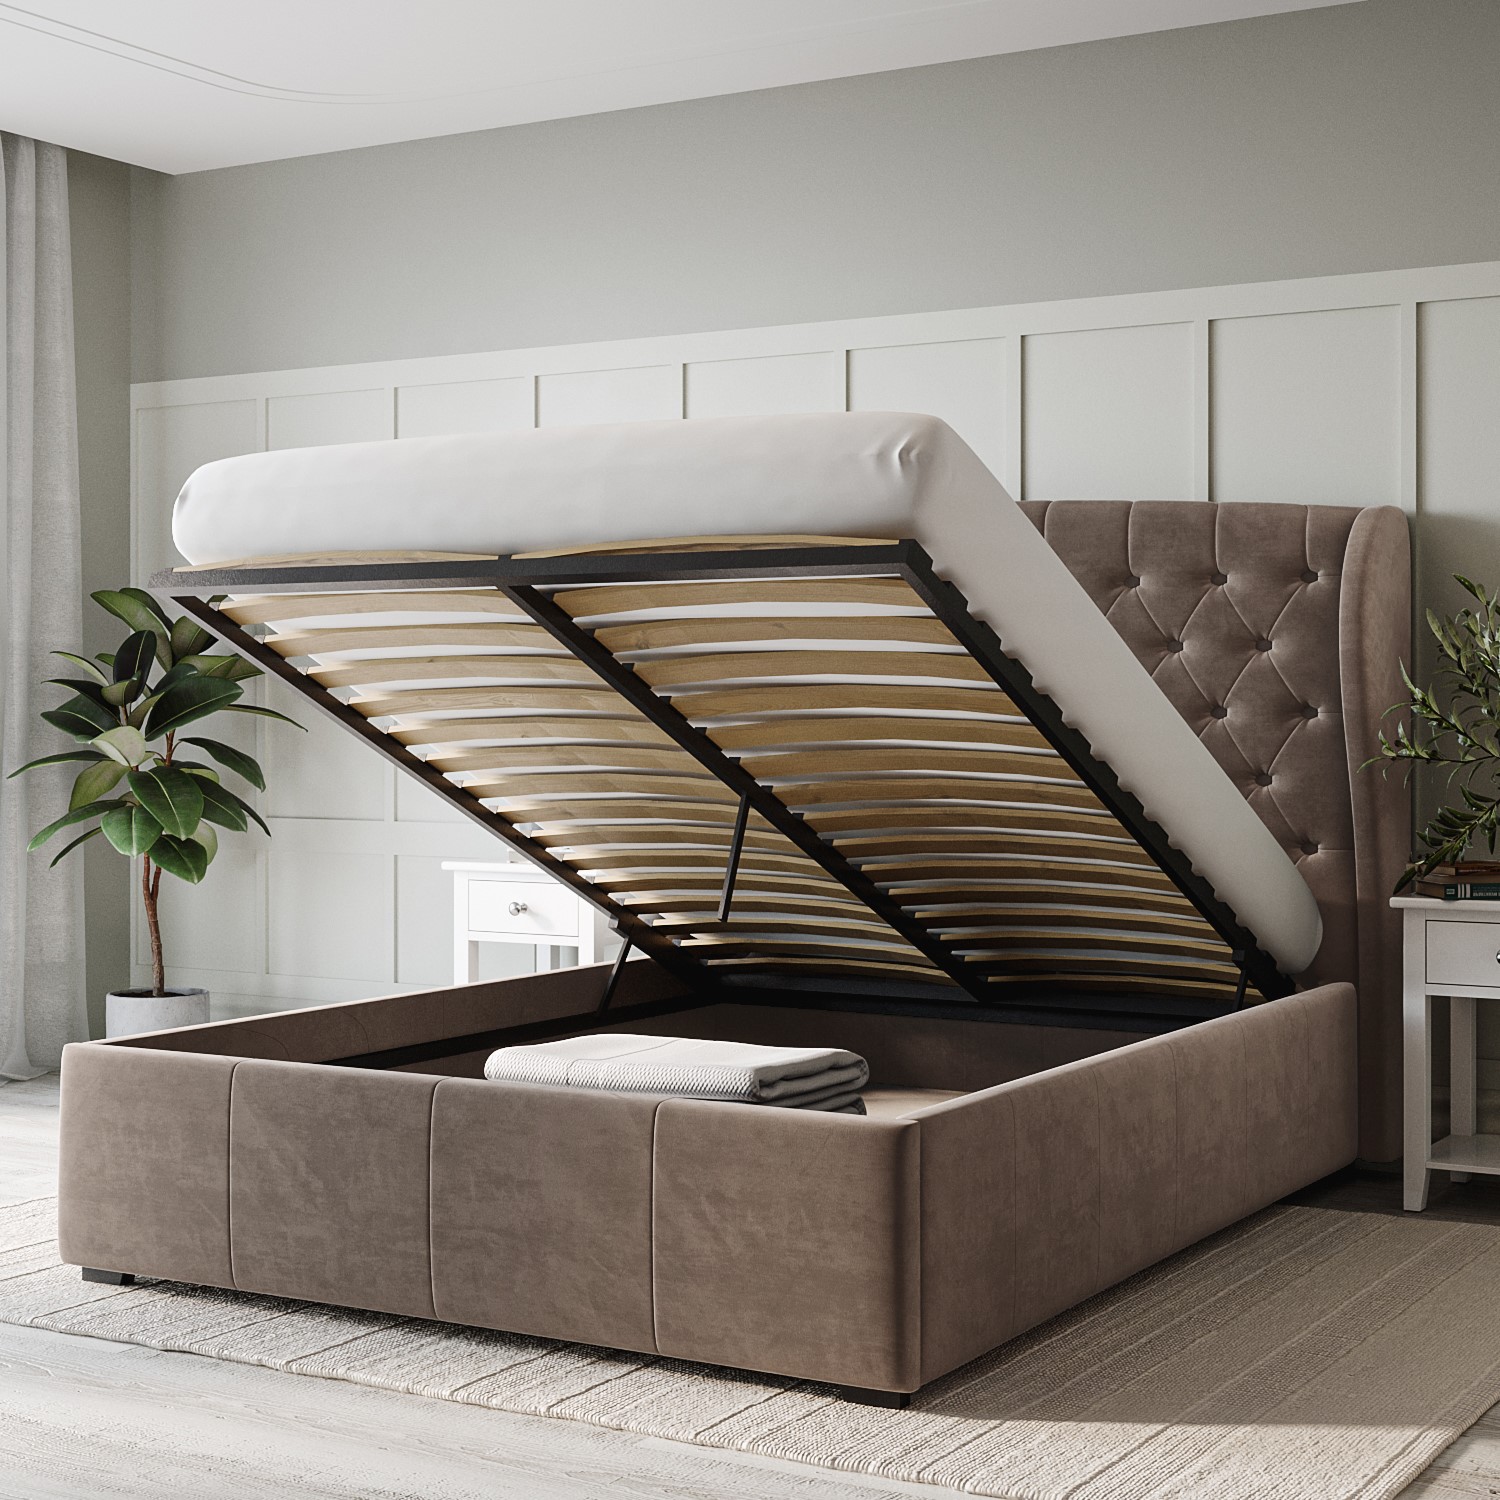 Read more about Mink brown velvet king size ottoman bed with winged headboard safina